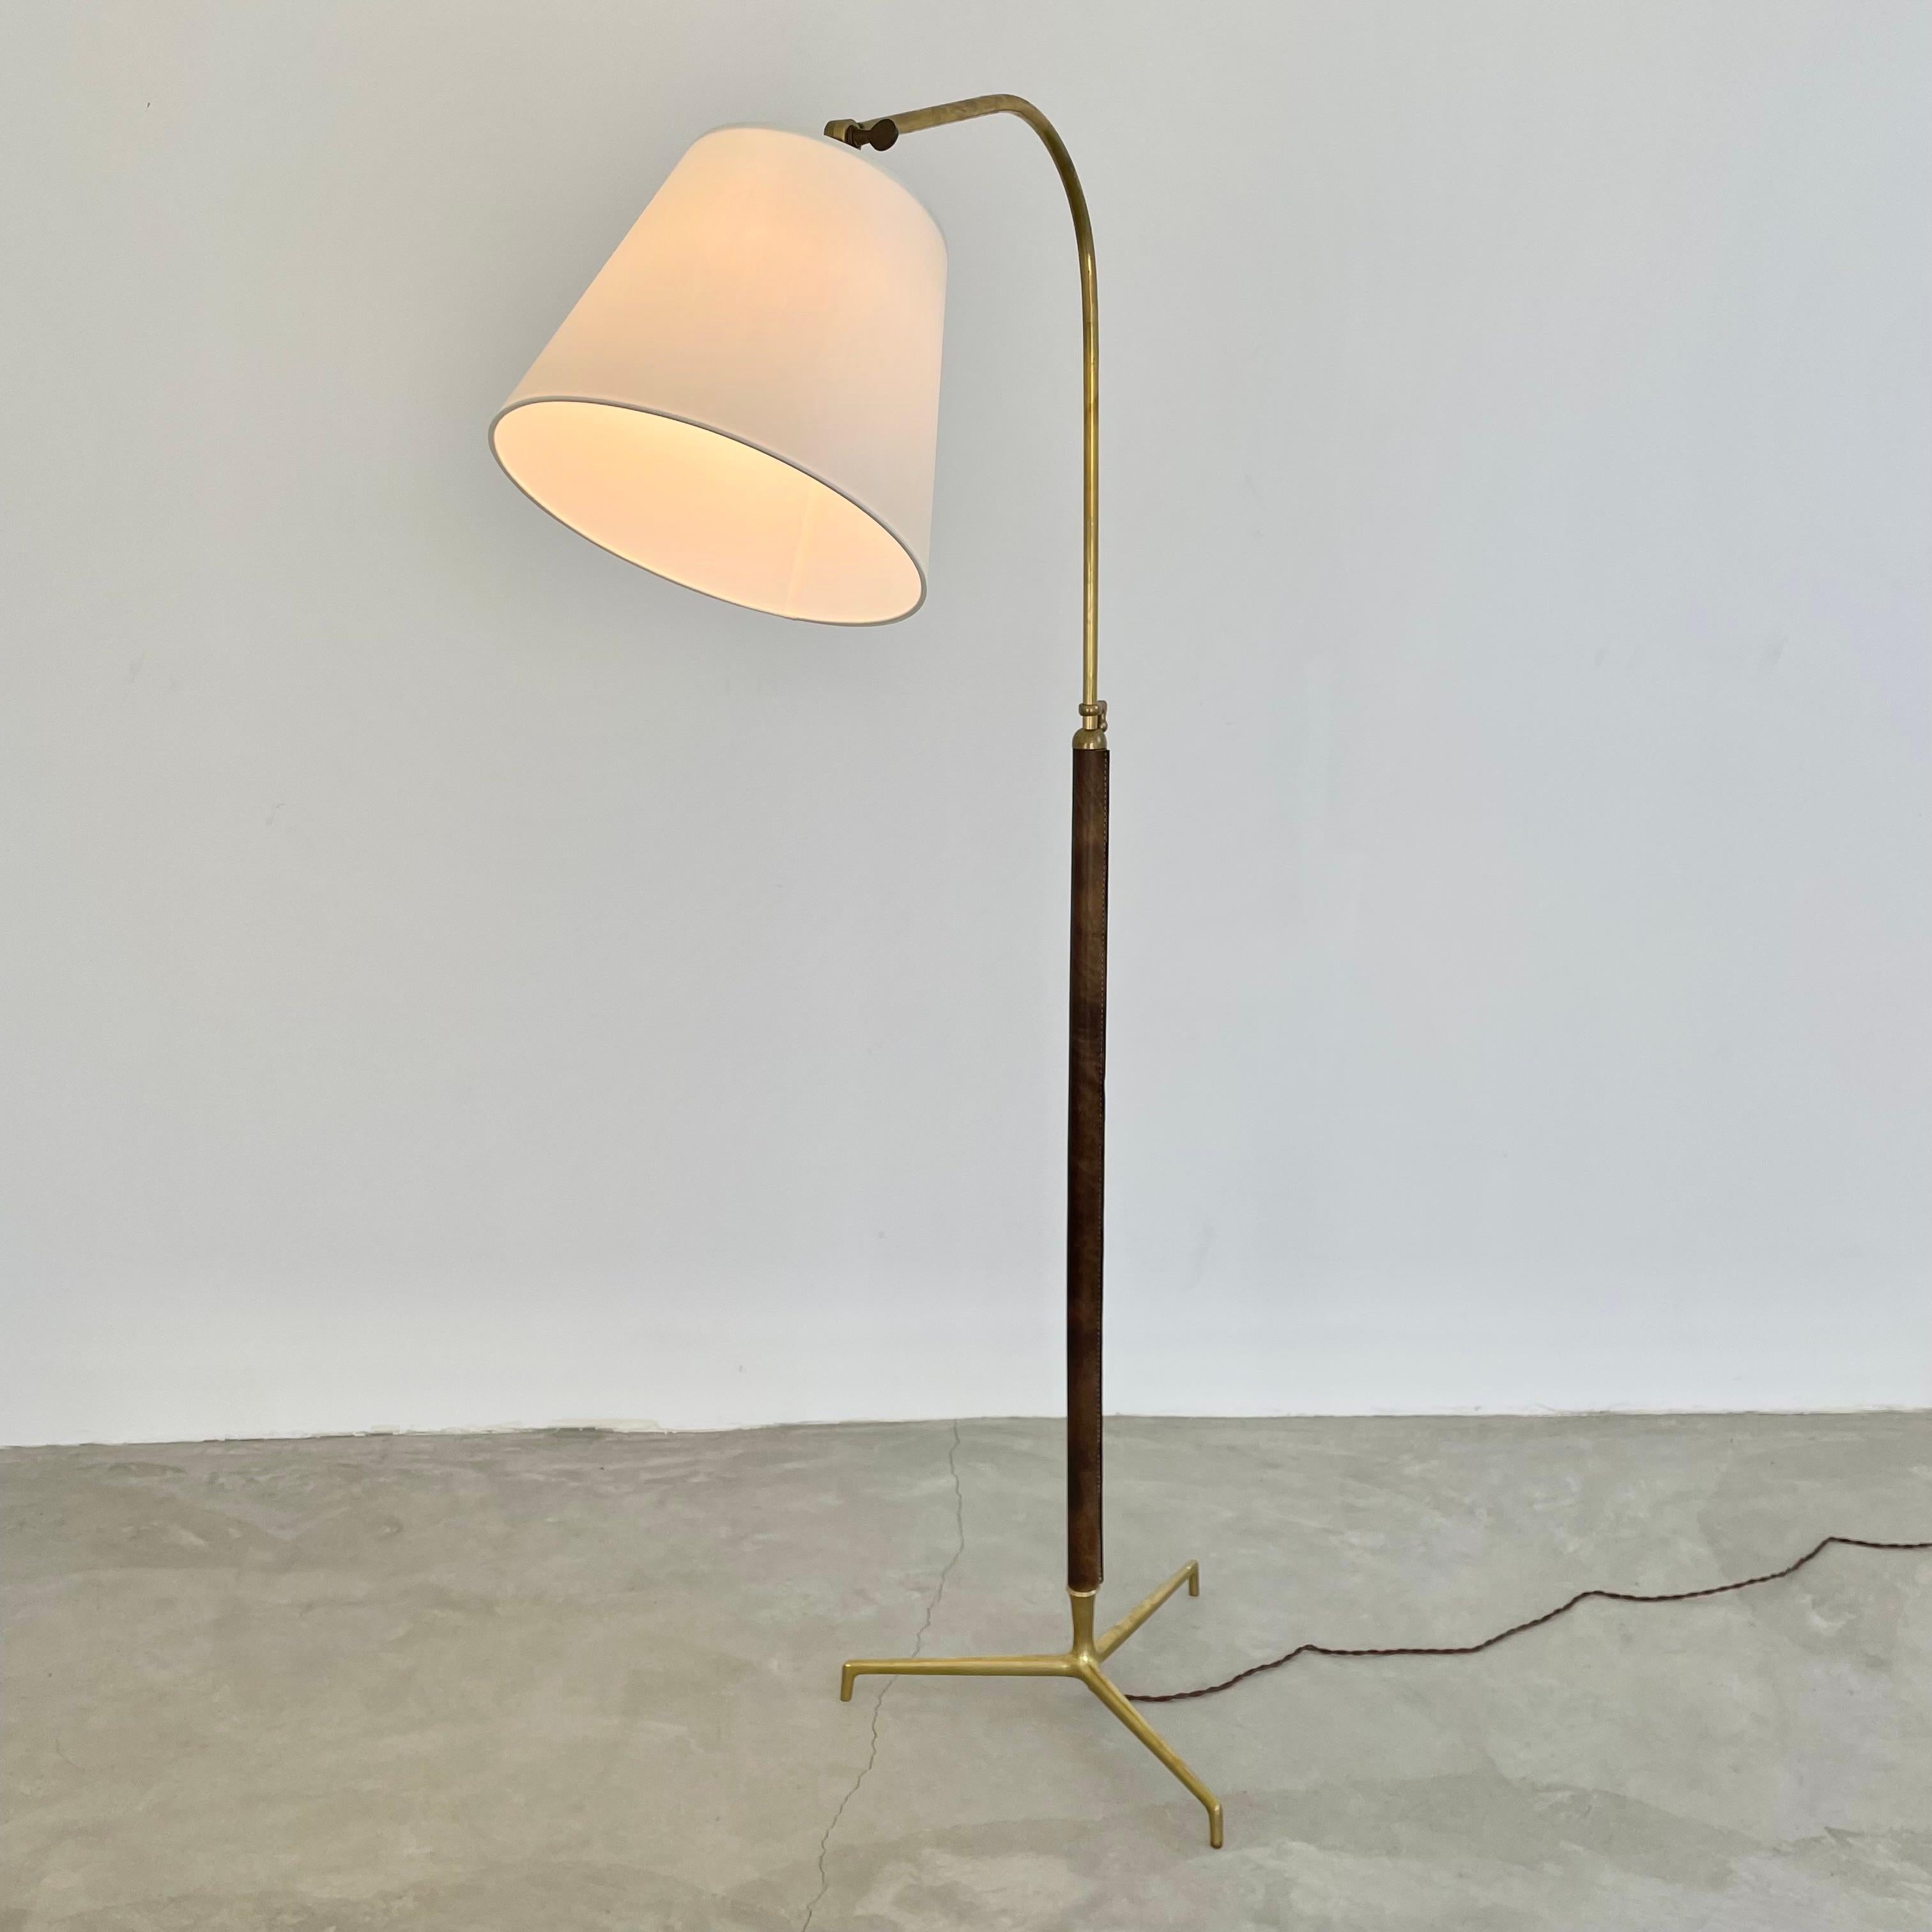 Handsome brass and leather floor lamp by French designer Jacques Adnet. Made in the 1950s. Tripod brass base secures into the stem which is wrapped in brown leather and secured with the signature Adnet contrast stitching. Height adjustable. Curved